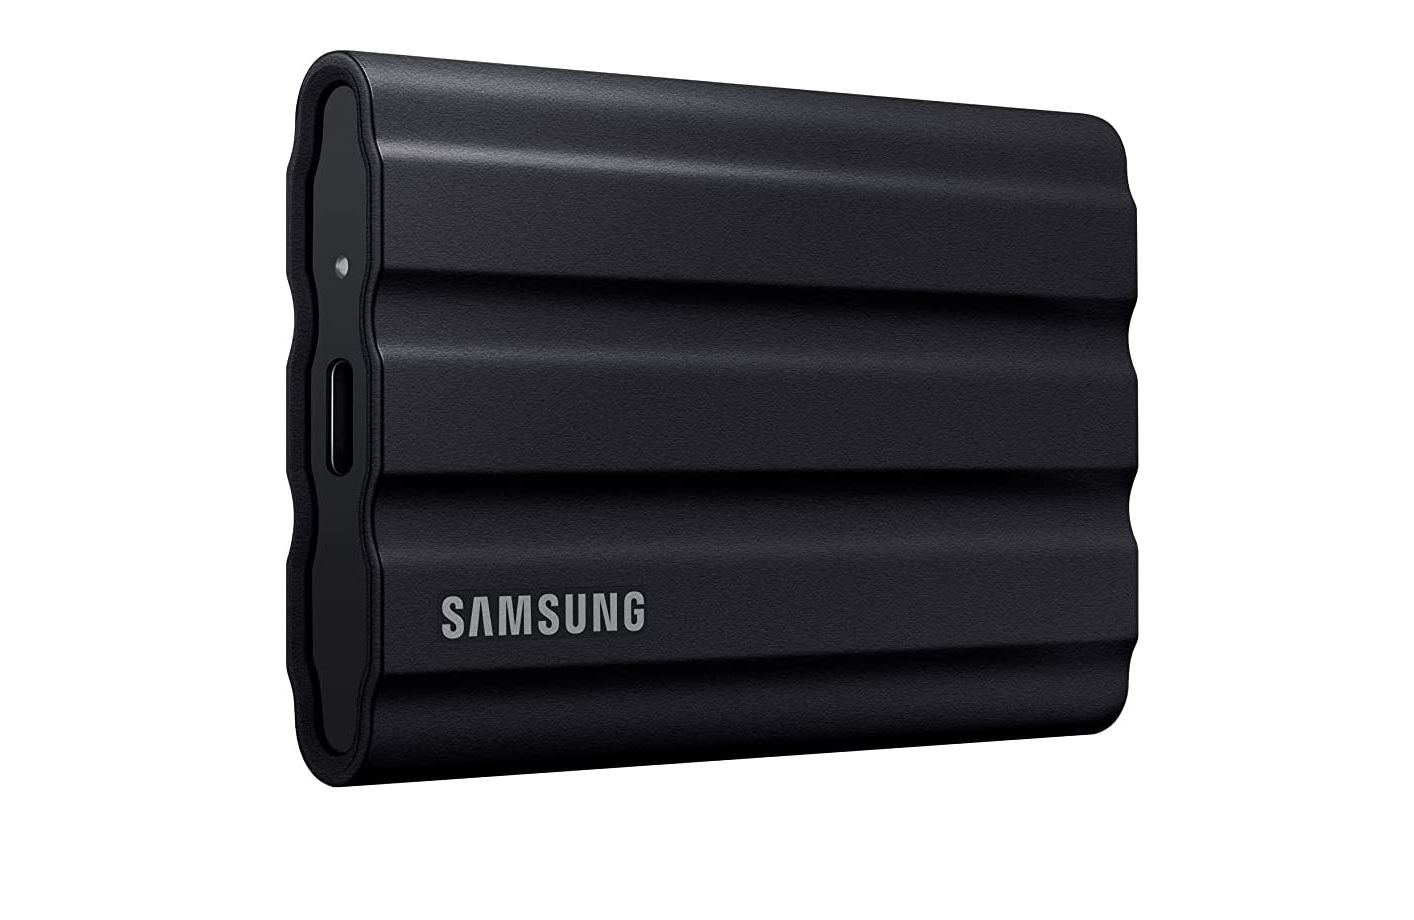 samsung t7 shield external ssd with a black finish